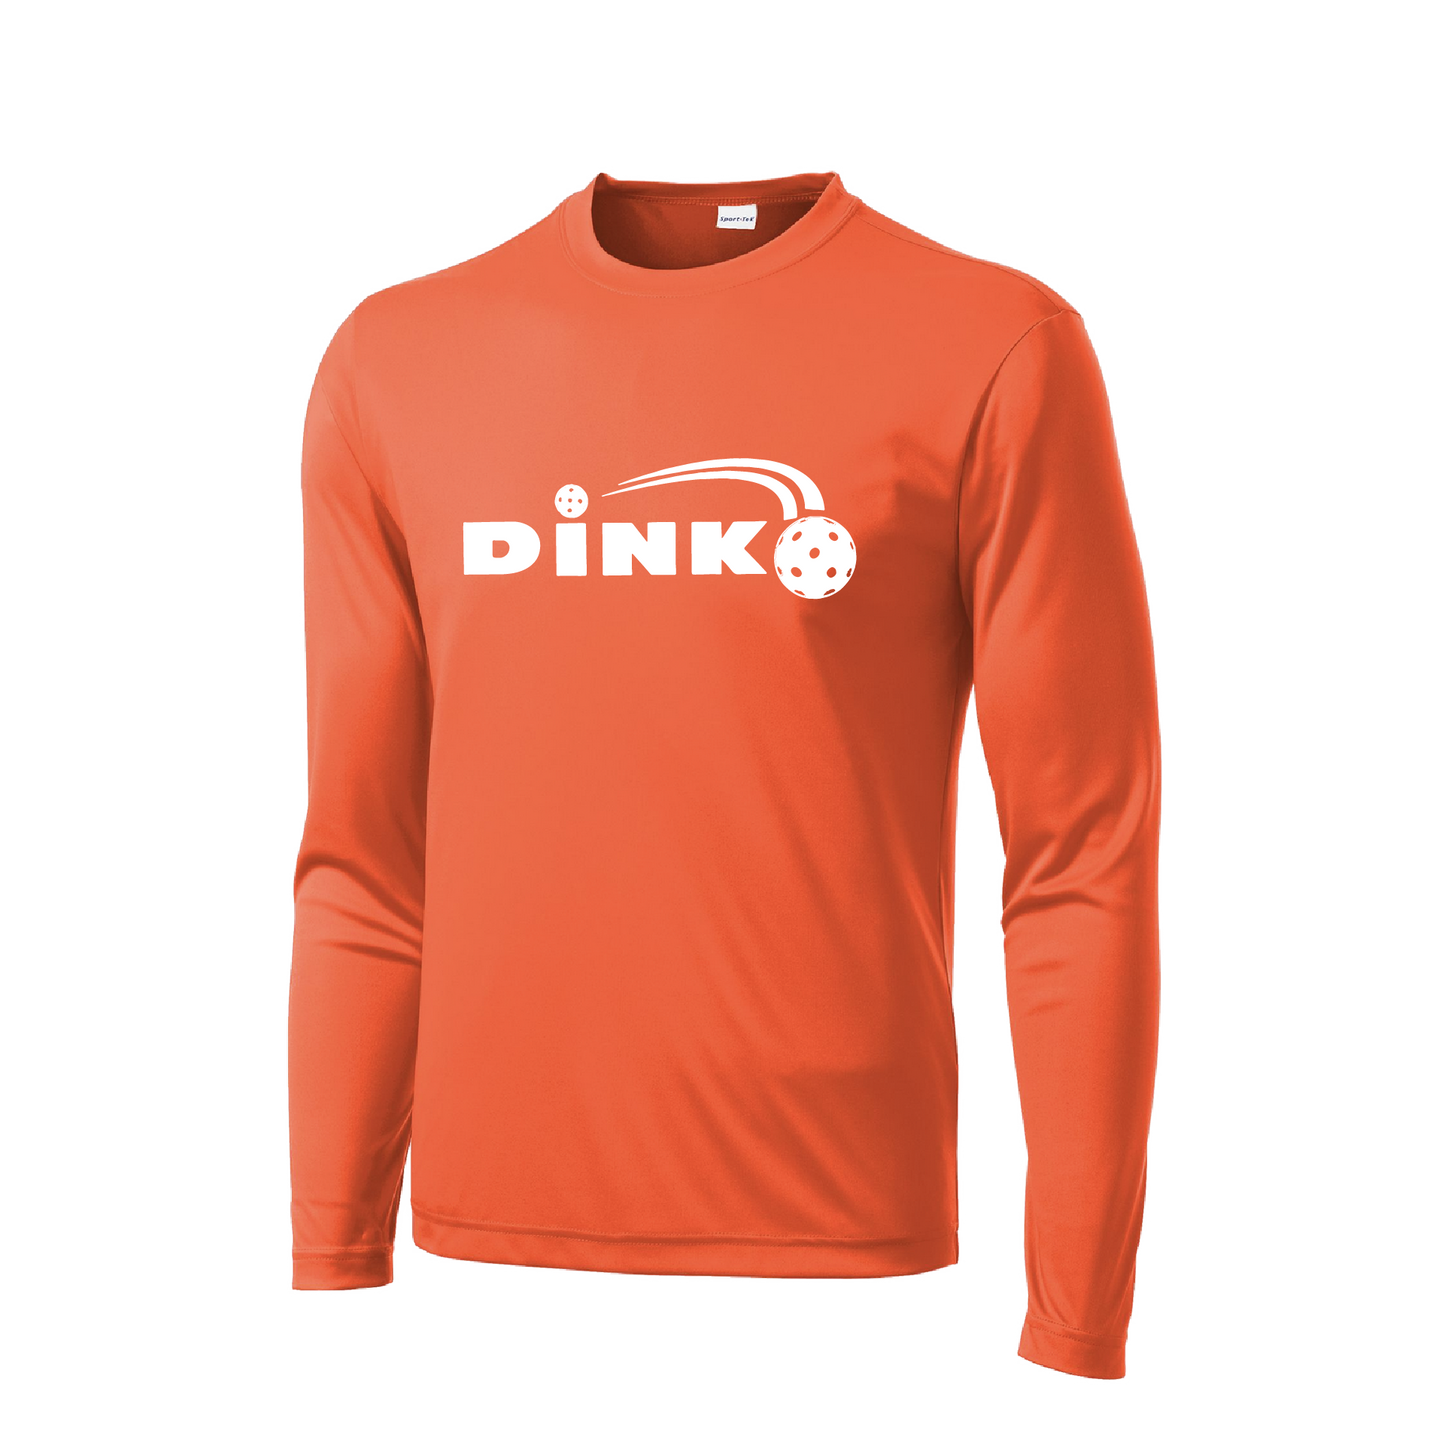 Pickelball Design: Dink  Men's Style: Long Sleeve  Shirts are lightweight, roomy and highly breathable. These moisture-wicking shirts are designed for athletic performance. They feature PosiCharge technology to lock in color and prevent logos from fading. Removable tag and set-in sleeves for comfort.